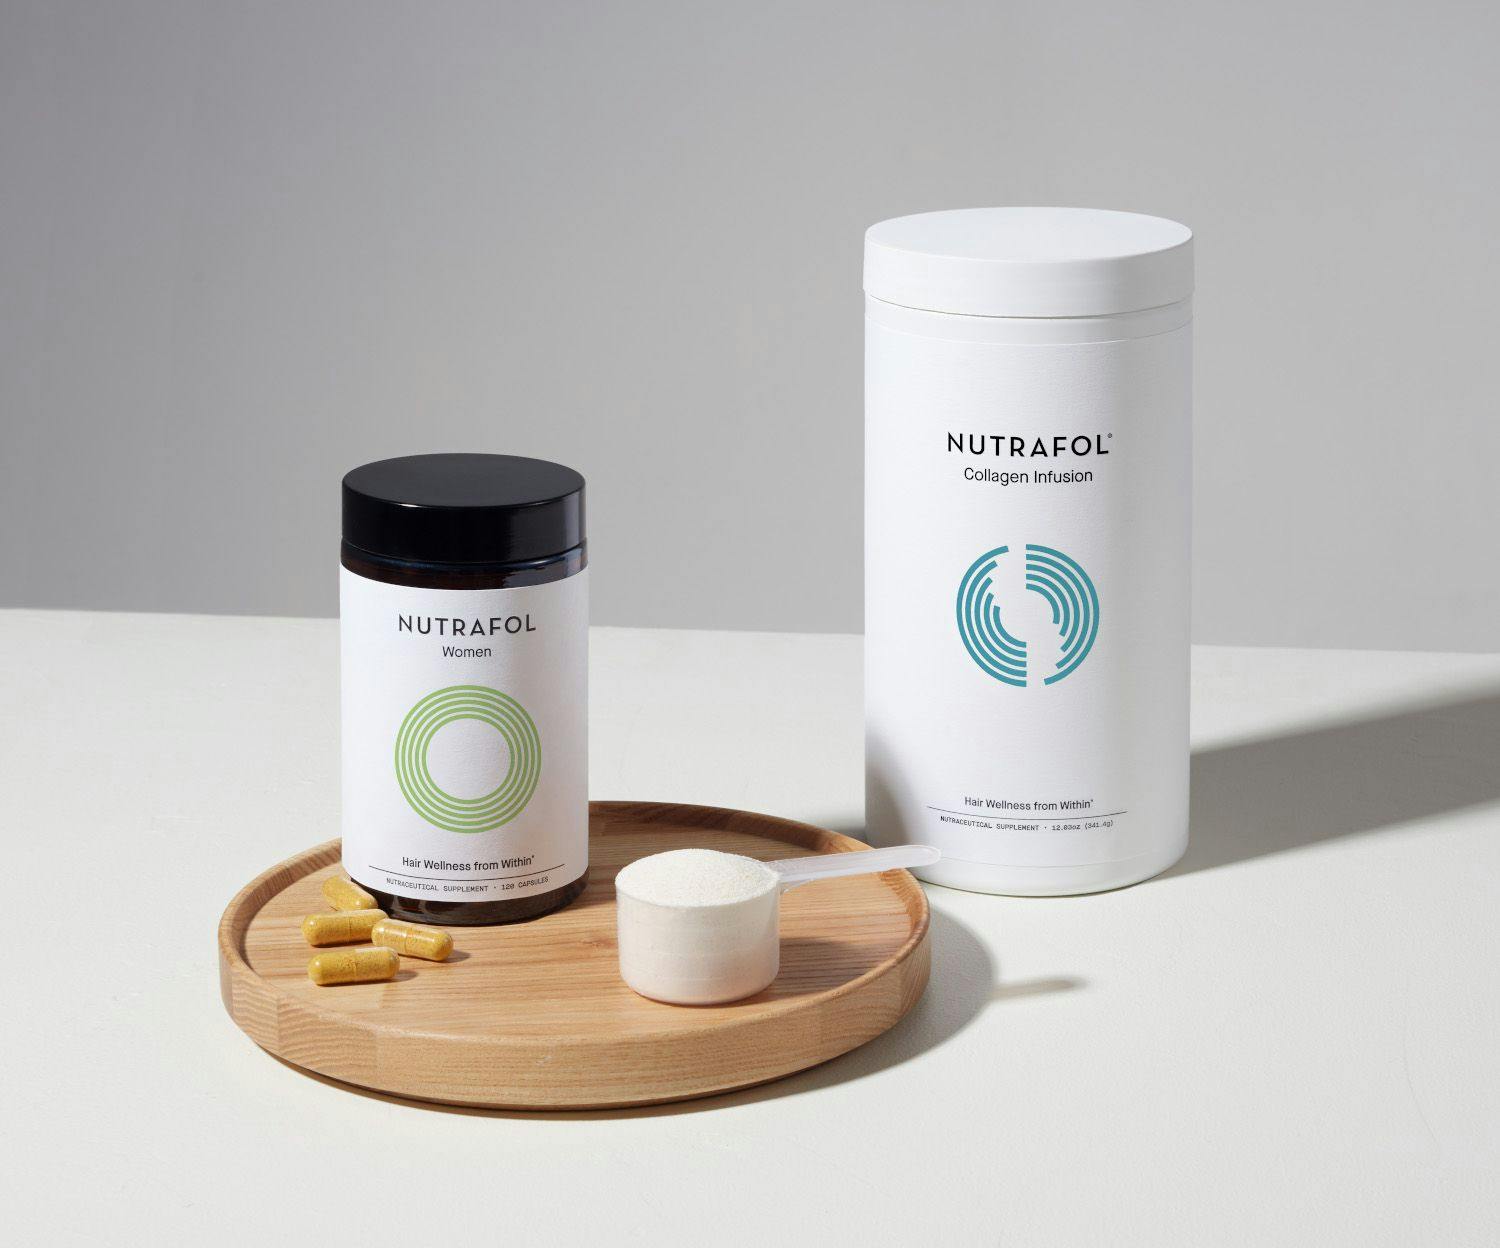 Nutrafol calls its new collagen supplement for hair health the first of its kind